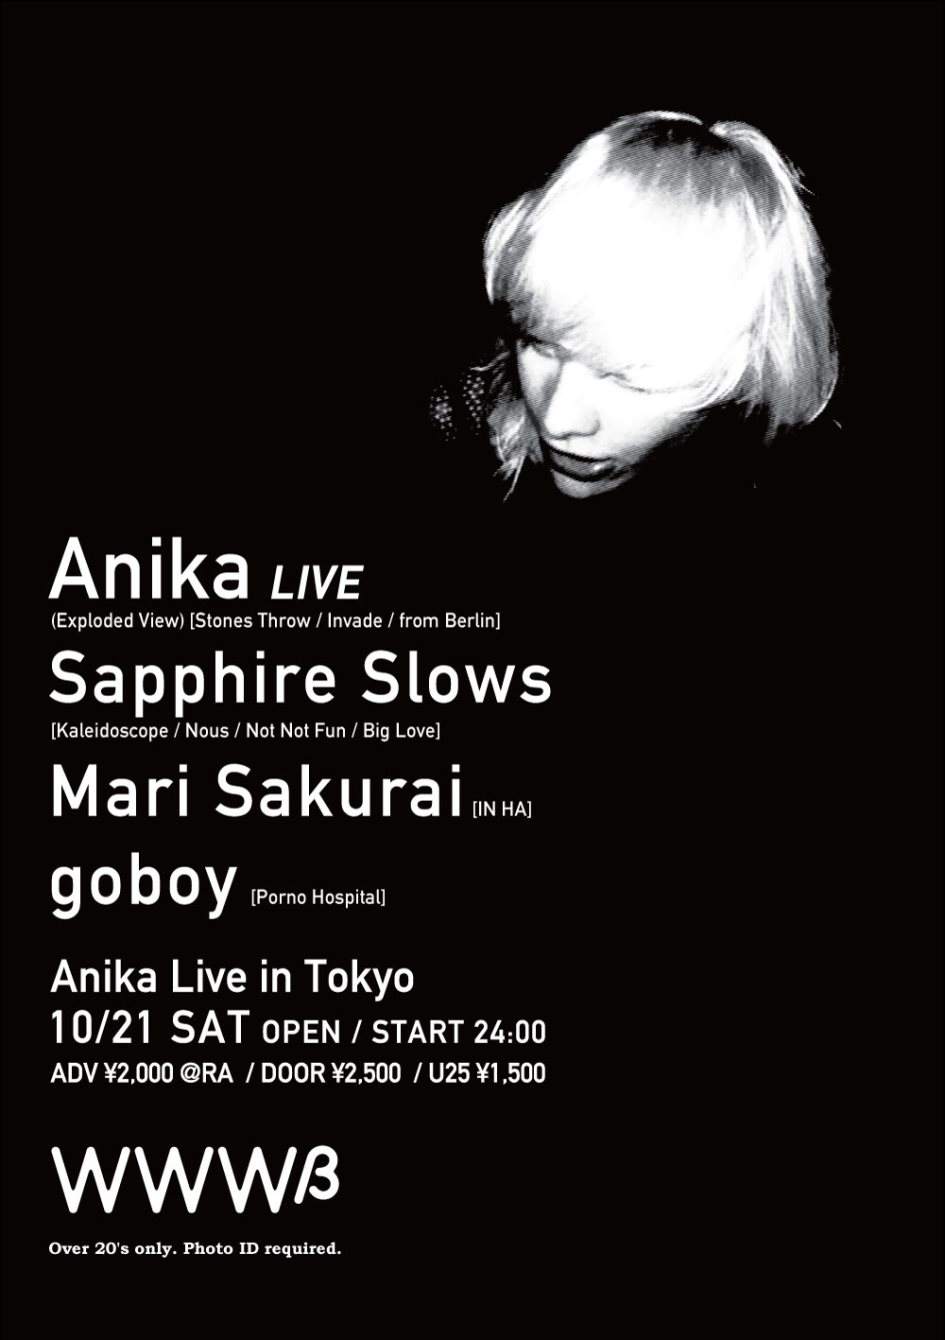 Anika Live in Tokyo - Flyer front